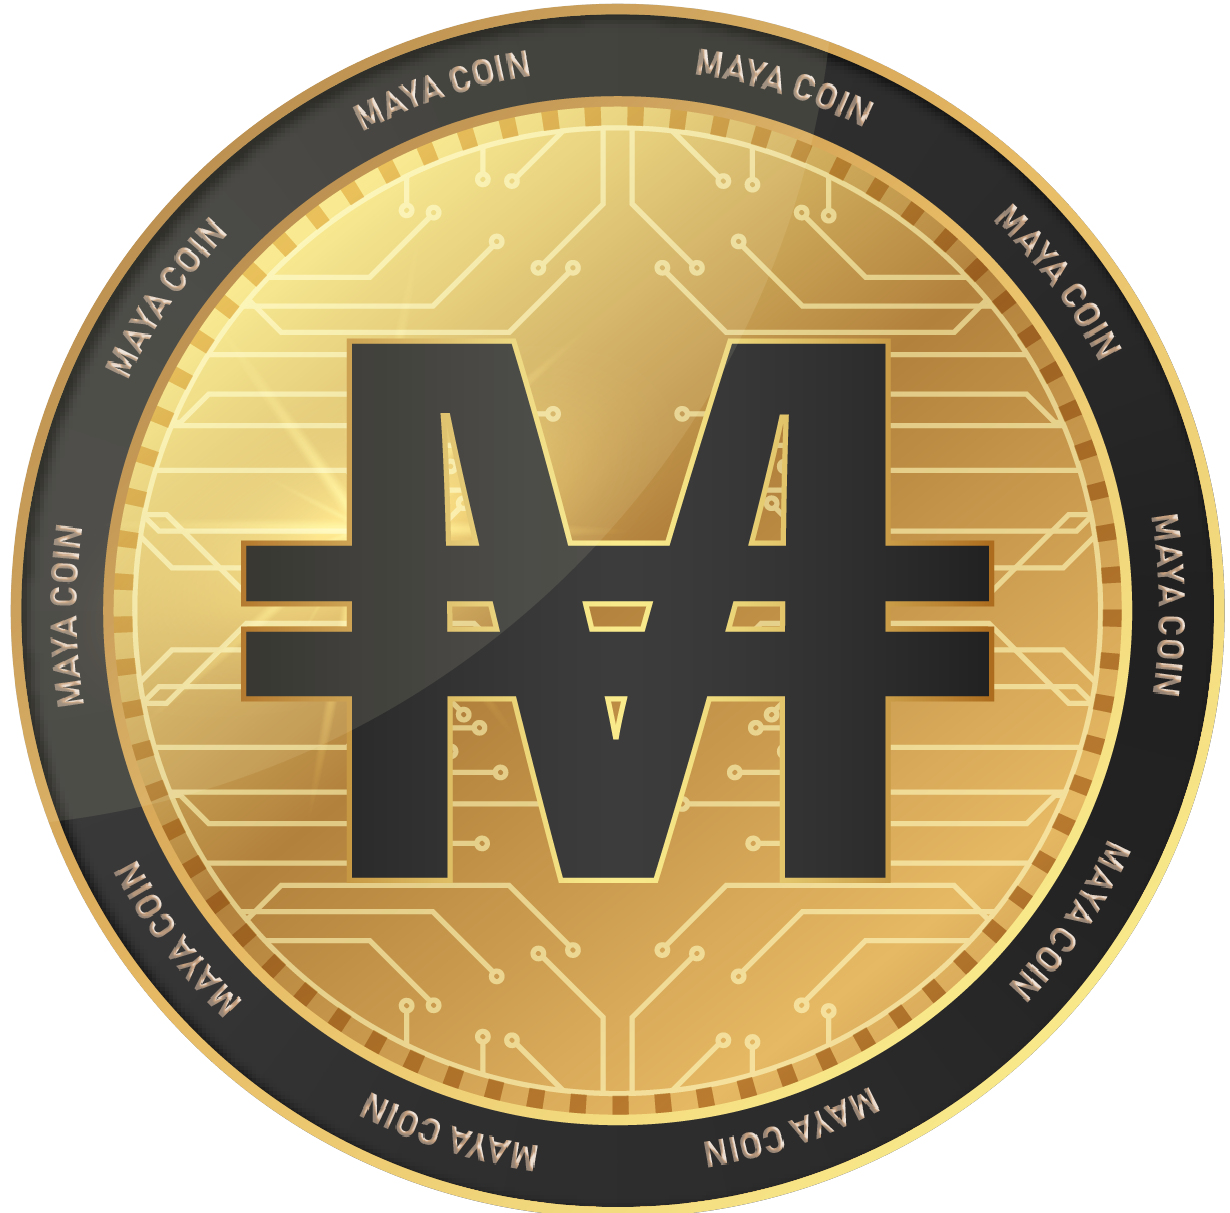 U. K. Financial Ltd.’s Maya Coin Will be Listed on Cat.ex Monday August 19, 2019